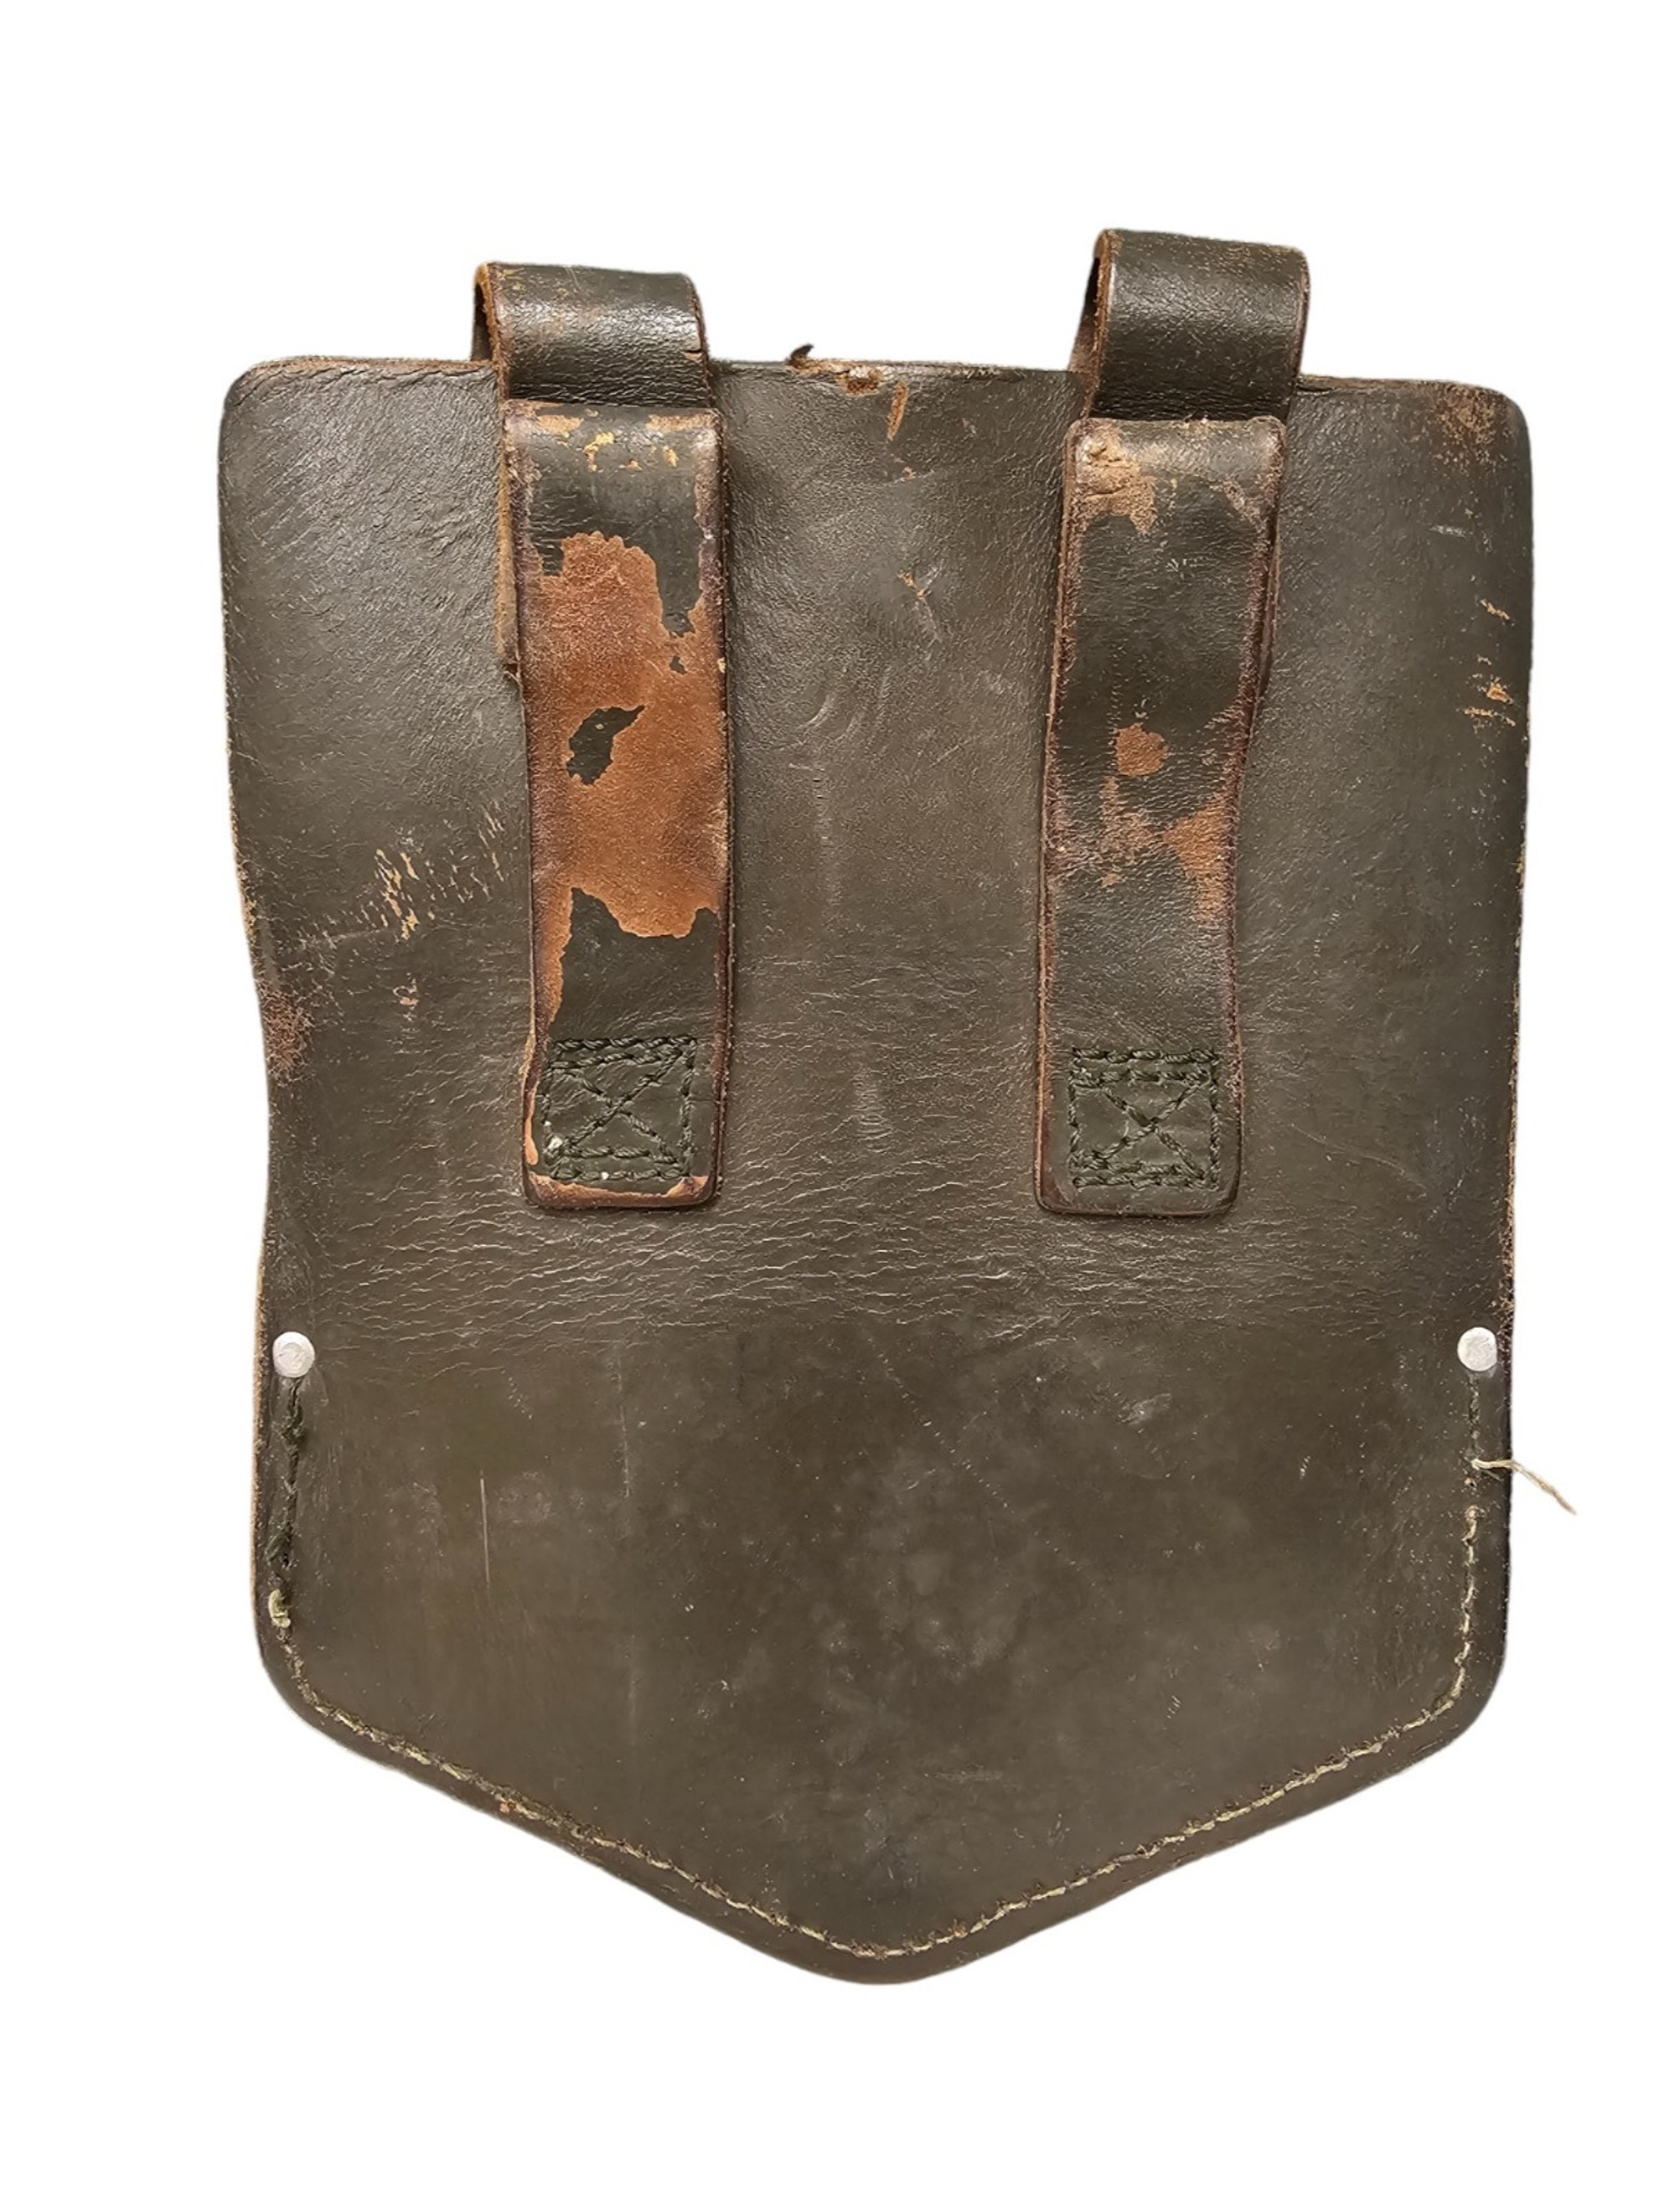 German 1960's Leather Shovel Cover